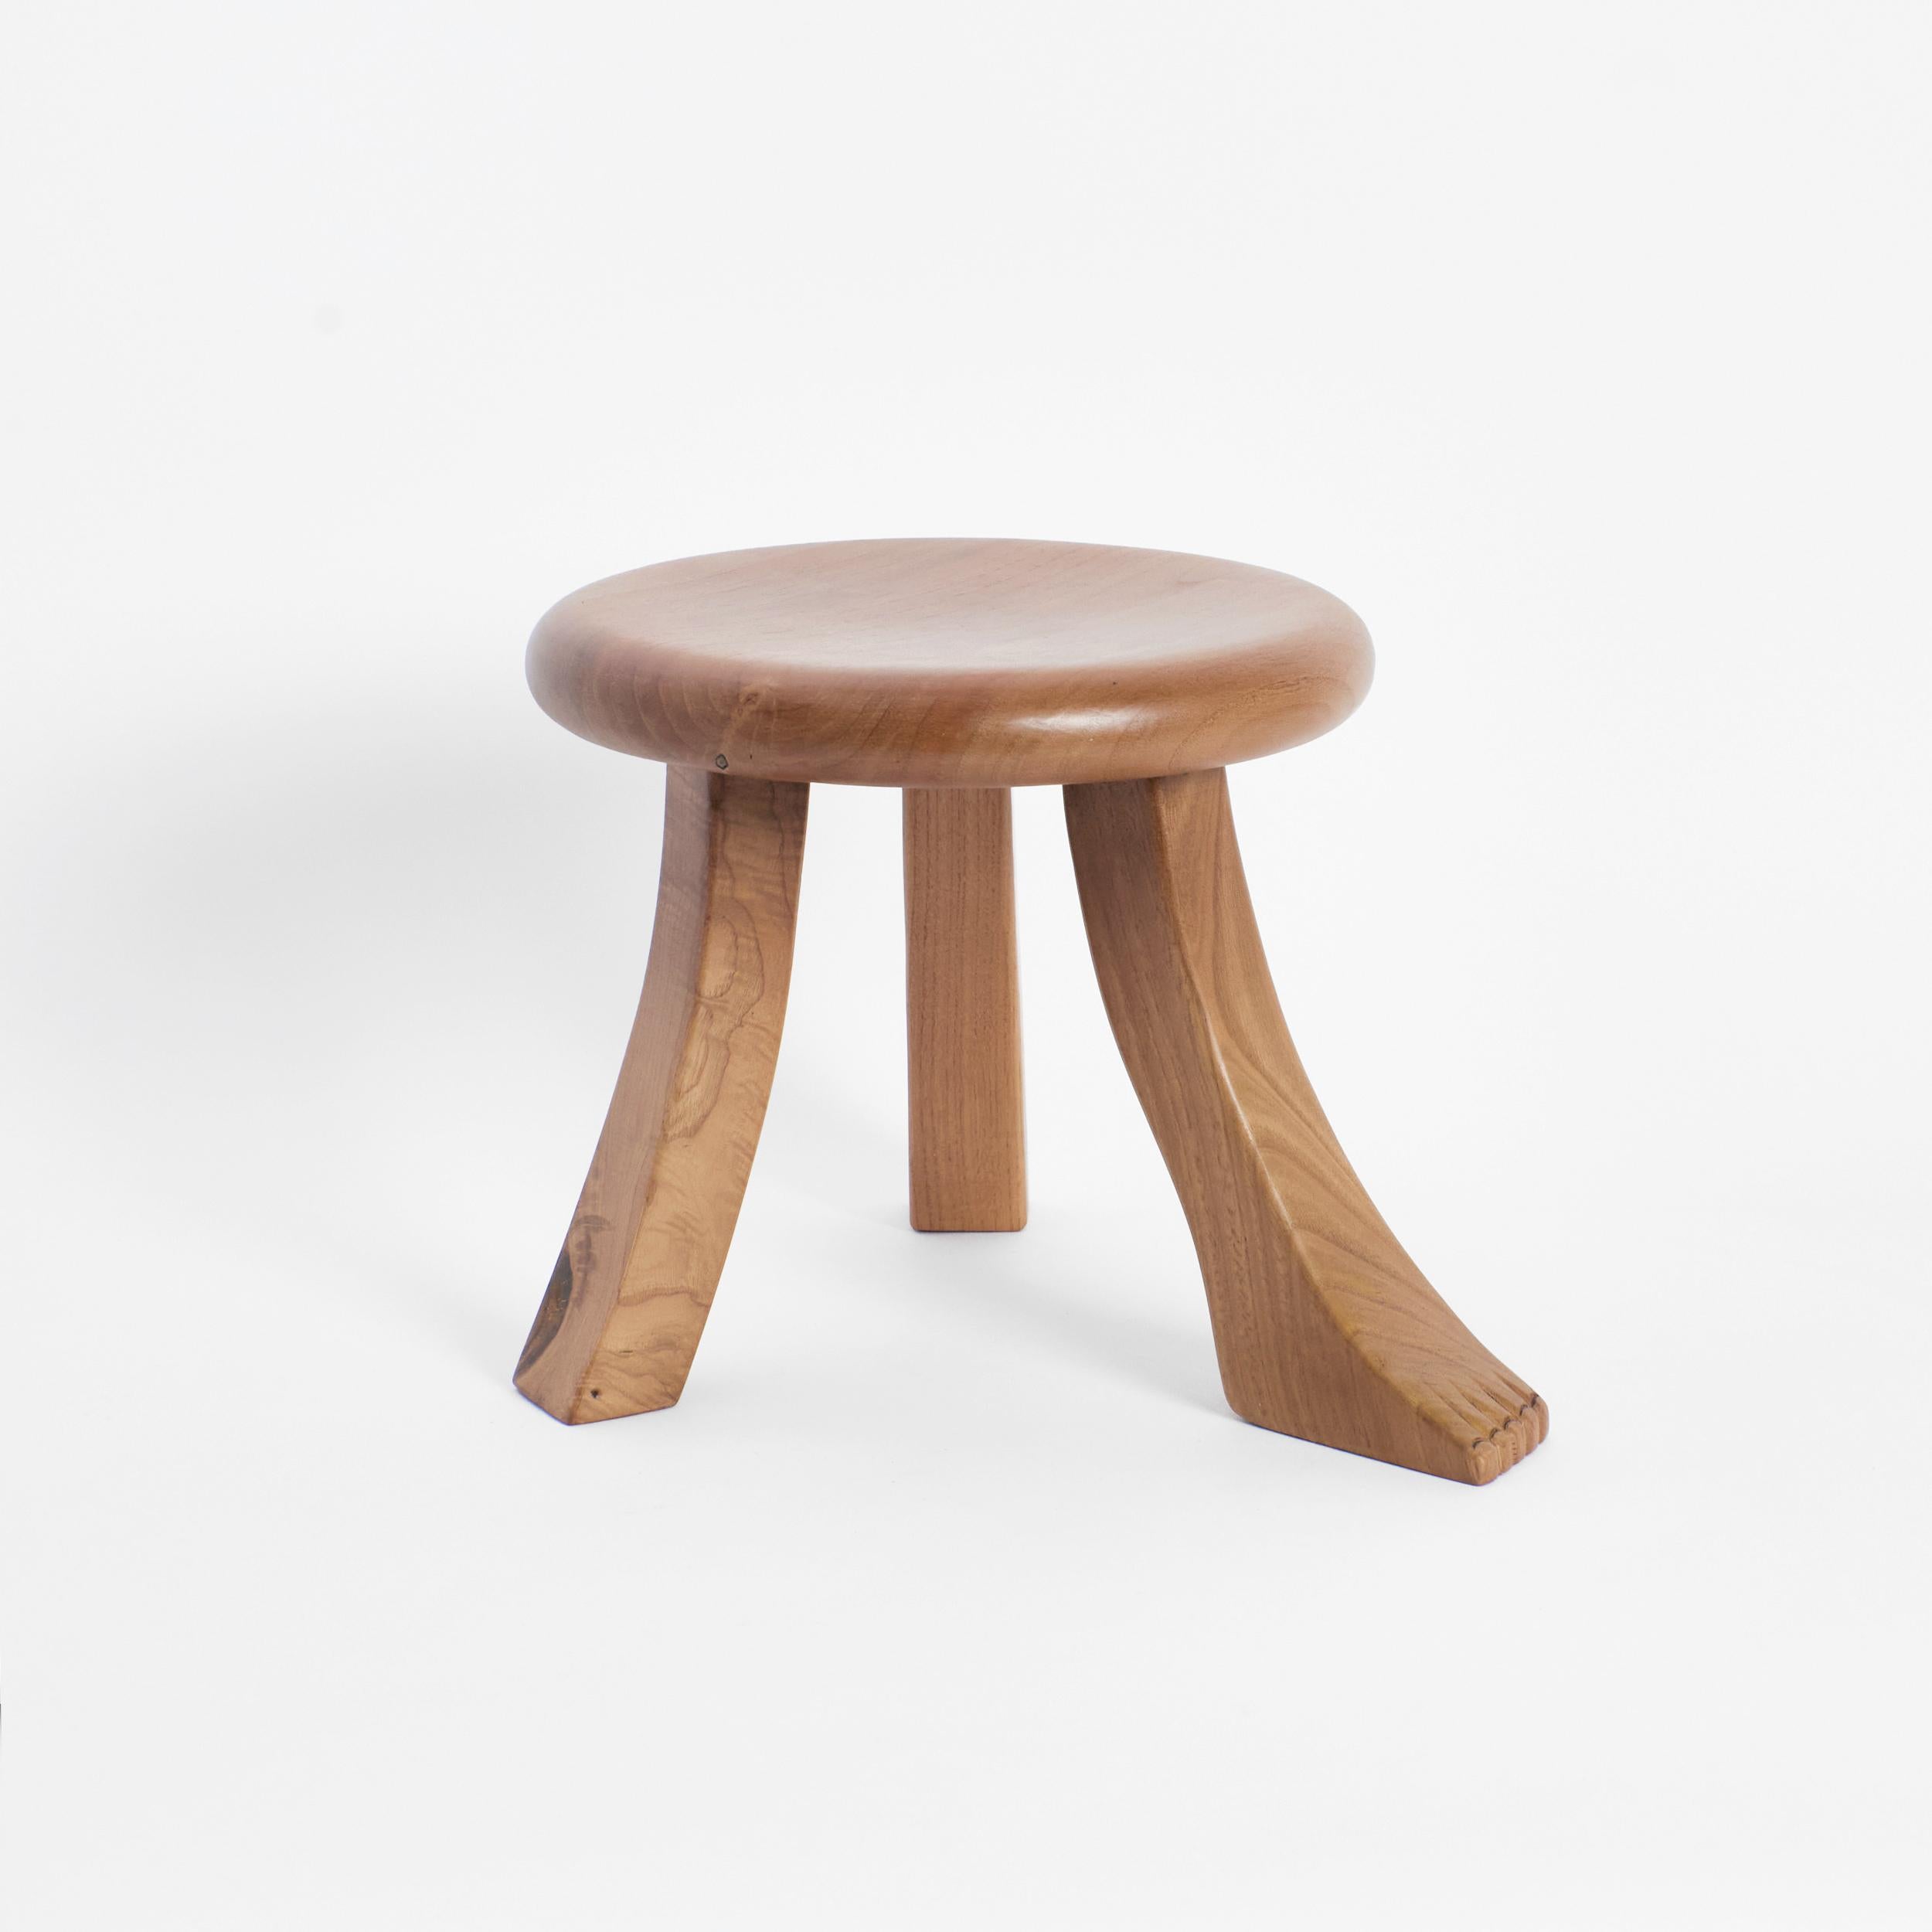 Foot stool in Natural by Project 213A
Dimensions: D 30 x W 30 x H 26.5 cm
Materials: Oak wood. 

This playful design is inspired by a classic milking stool, and has a fun twist with three individually shaped legs. The stool is hand carved by